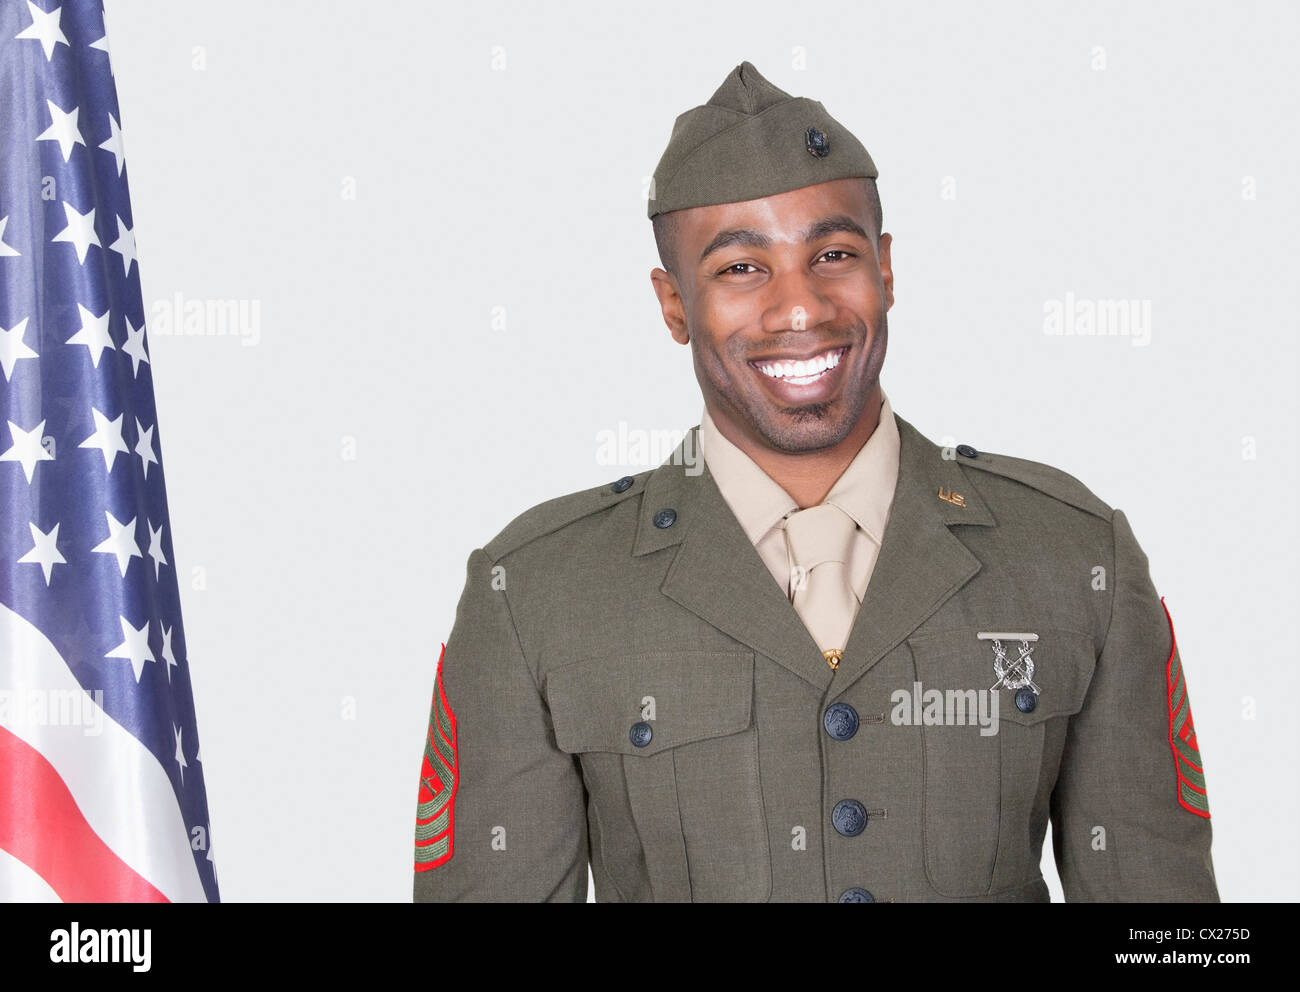 Portrait of a male US soldier smiling with American flag over gray ...